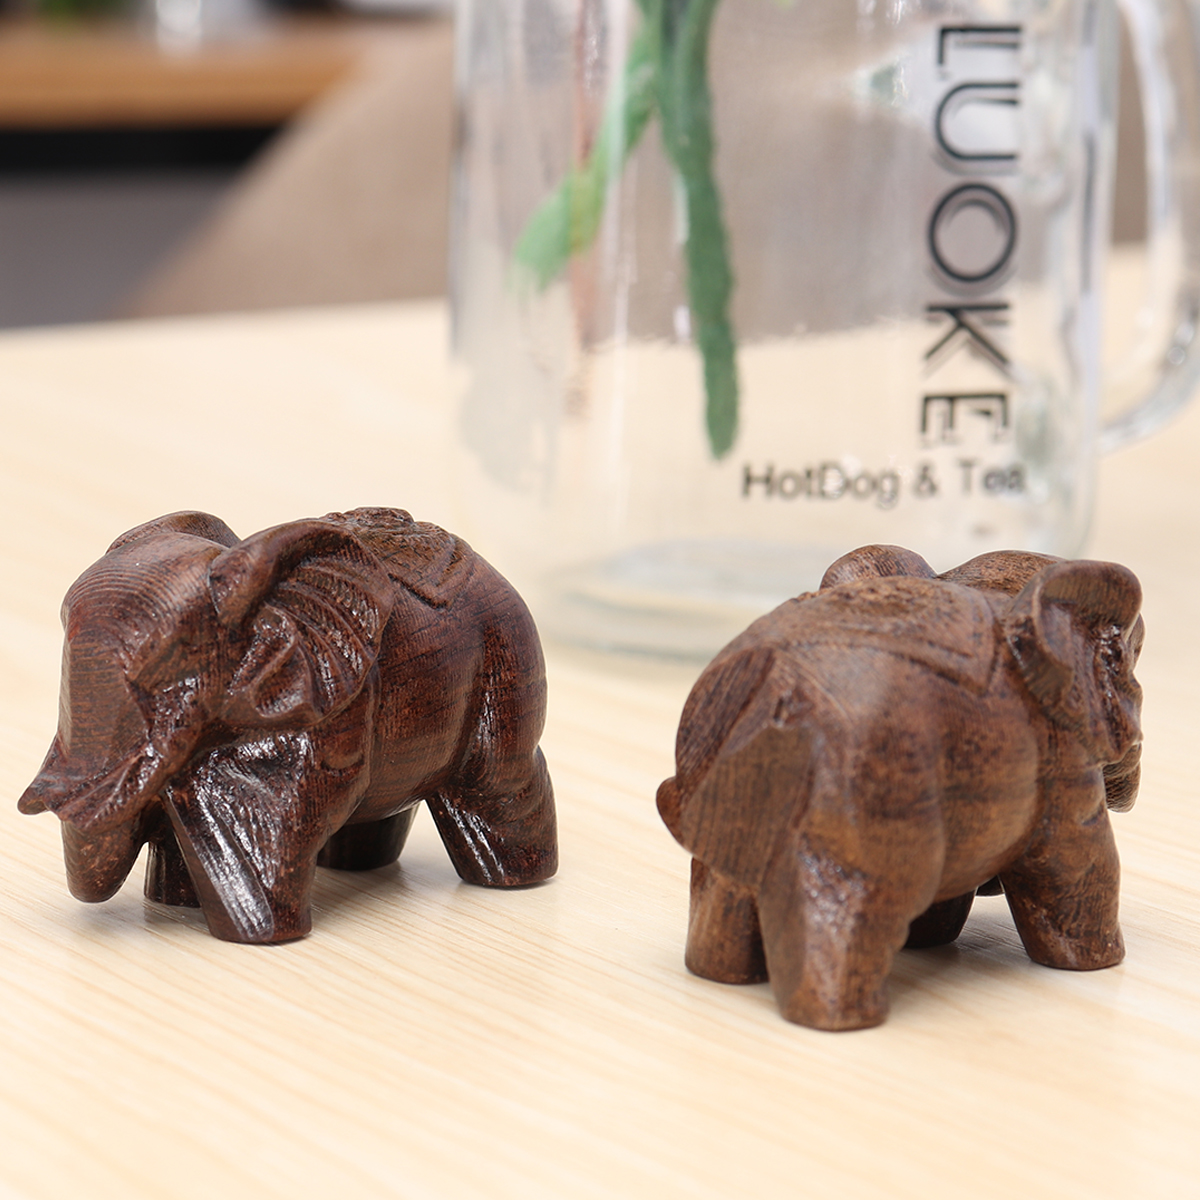 1-Pair-Natural-Agarwood-Elephant-Wood-Carving-Wood-Crafts-Retro-Decoration-Craft-Creative-Gifts-Home-1759099-11